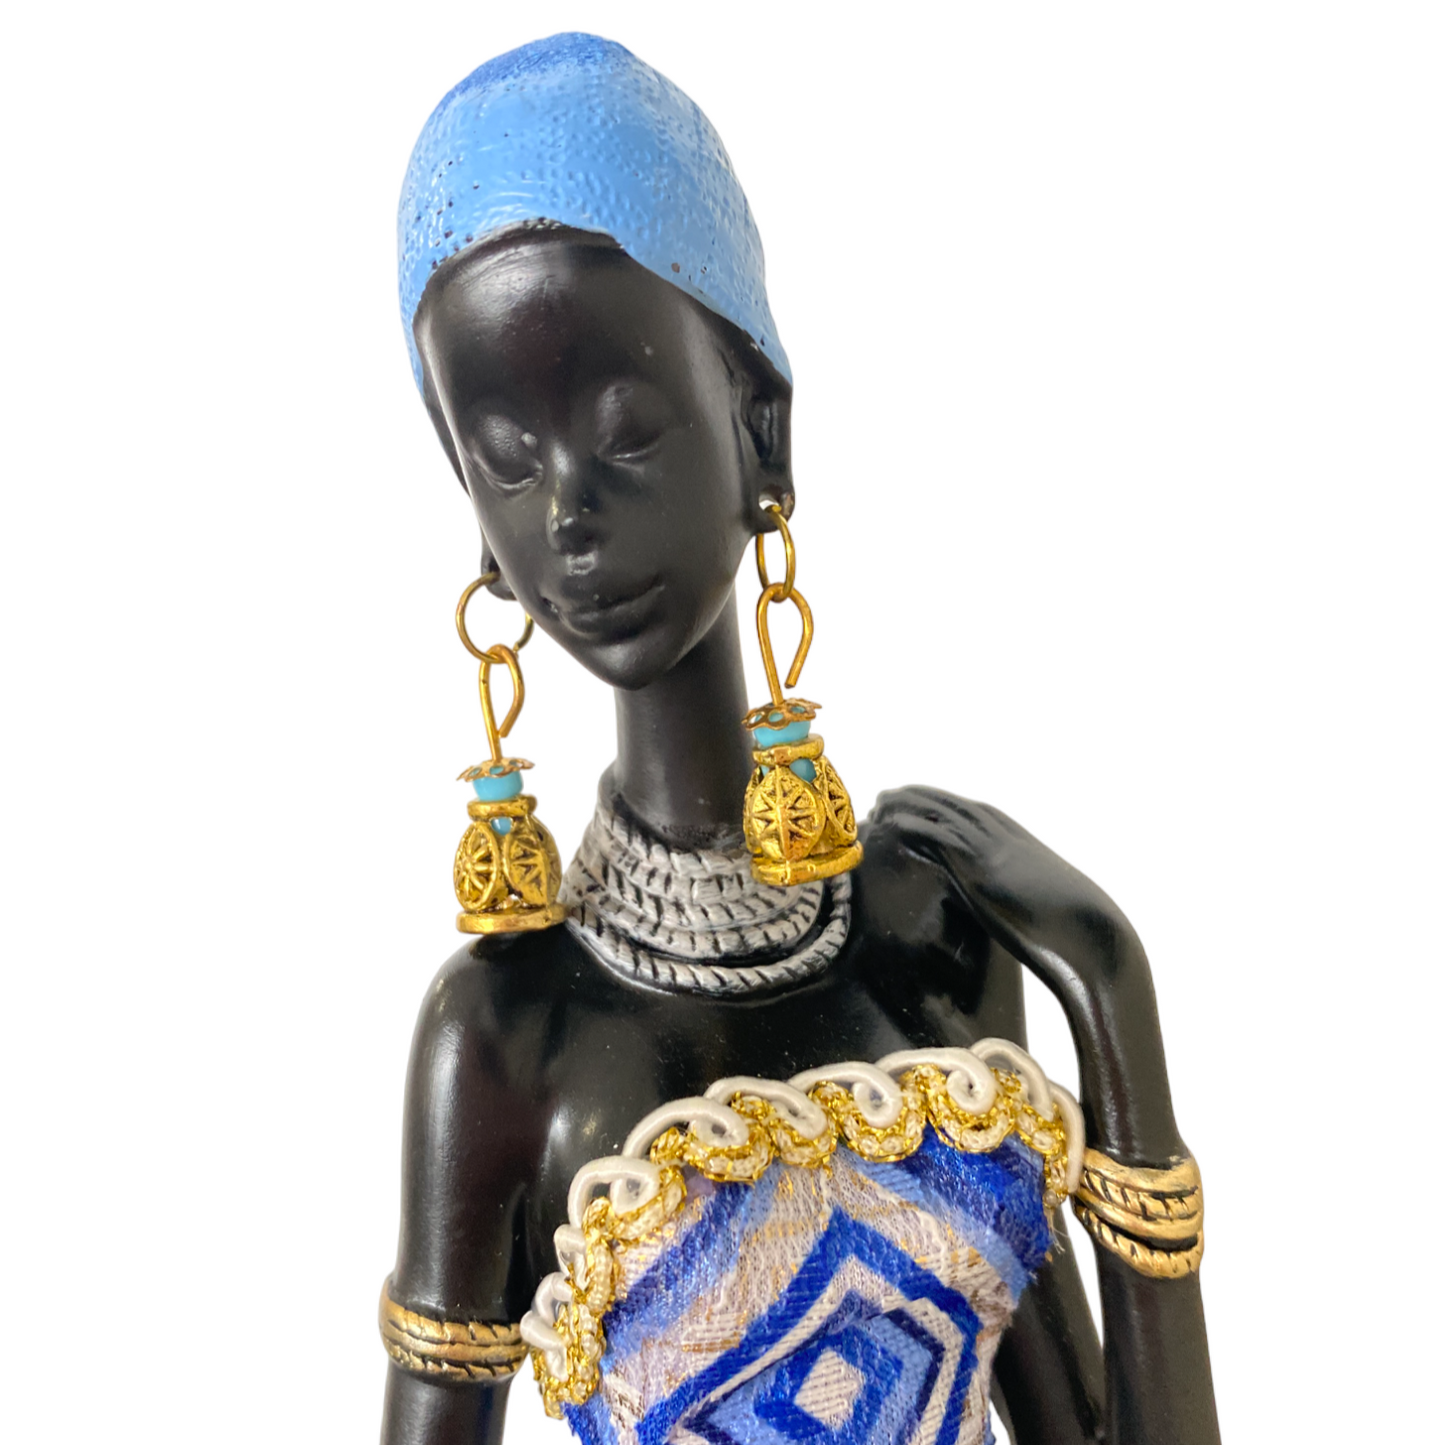 African Lady Figurine - Blue, White & Gold